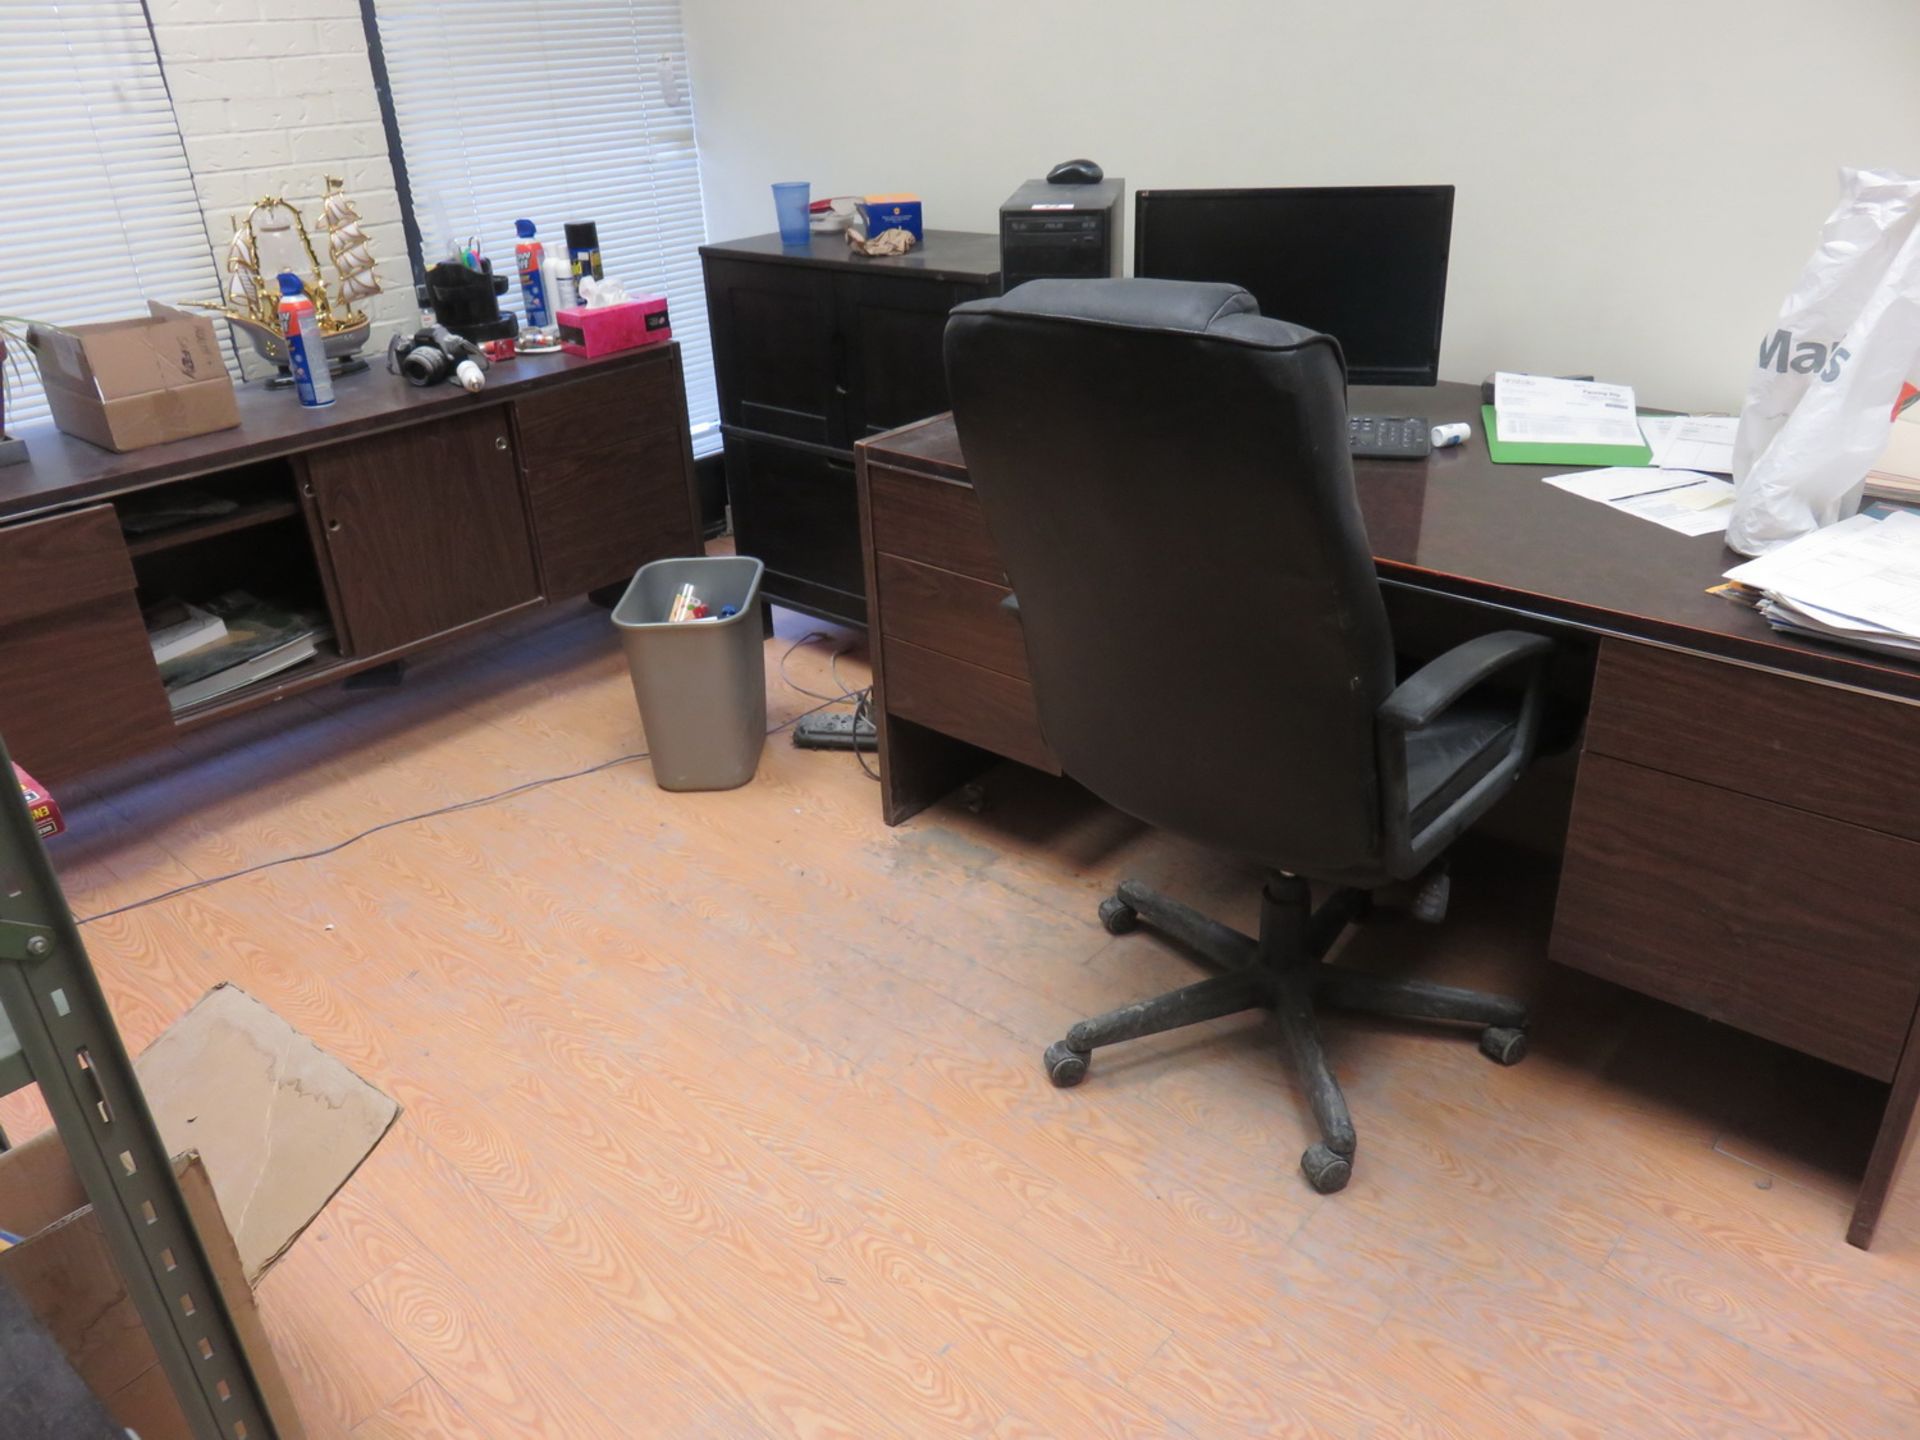 LOT - DESKS, CHAIRS, CABINETS, ETC. - Image 2 of 3